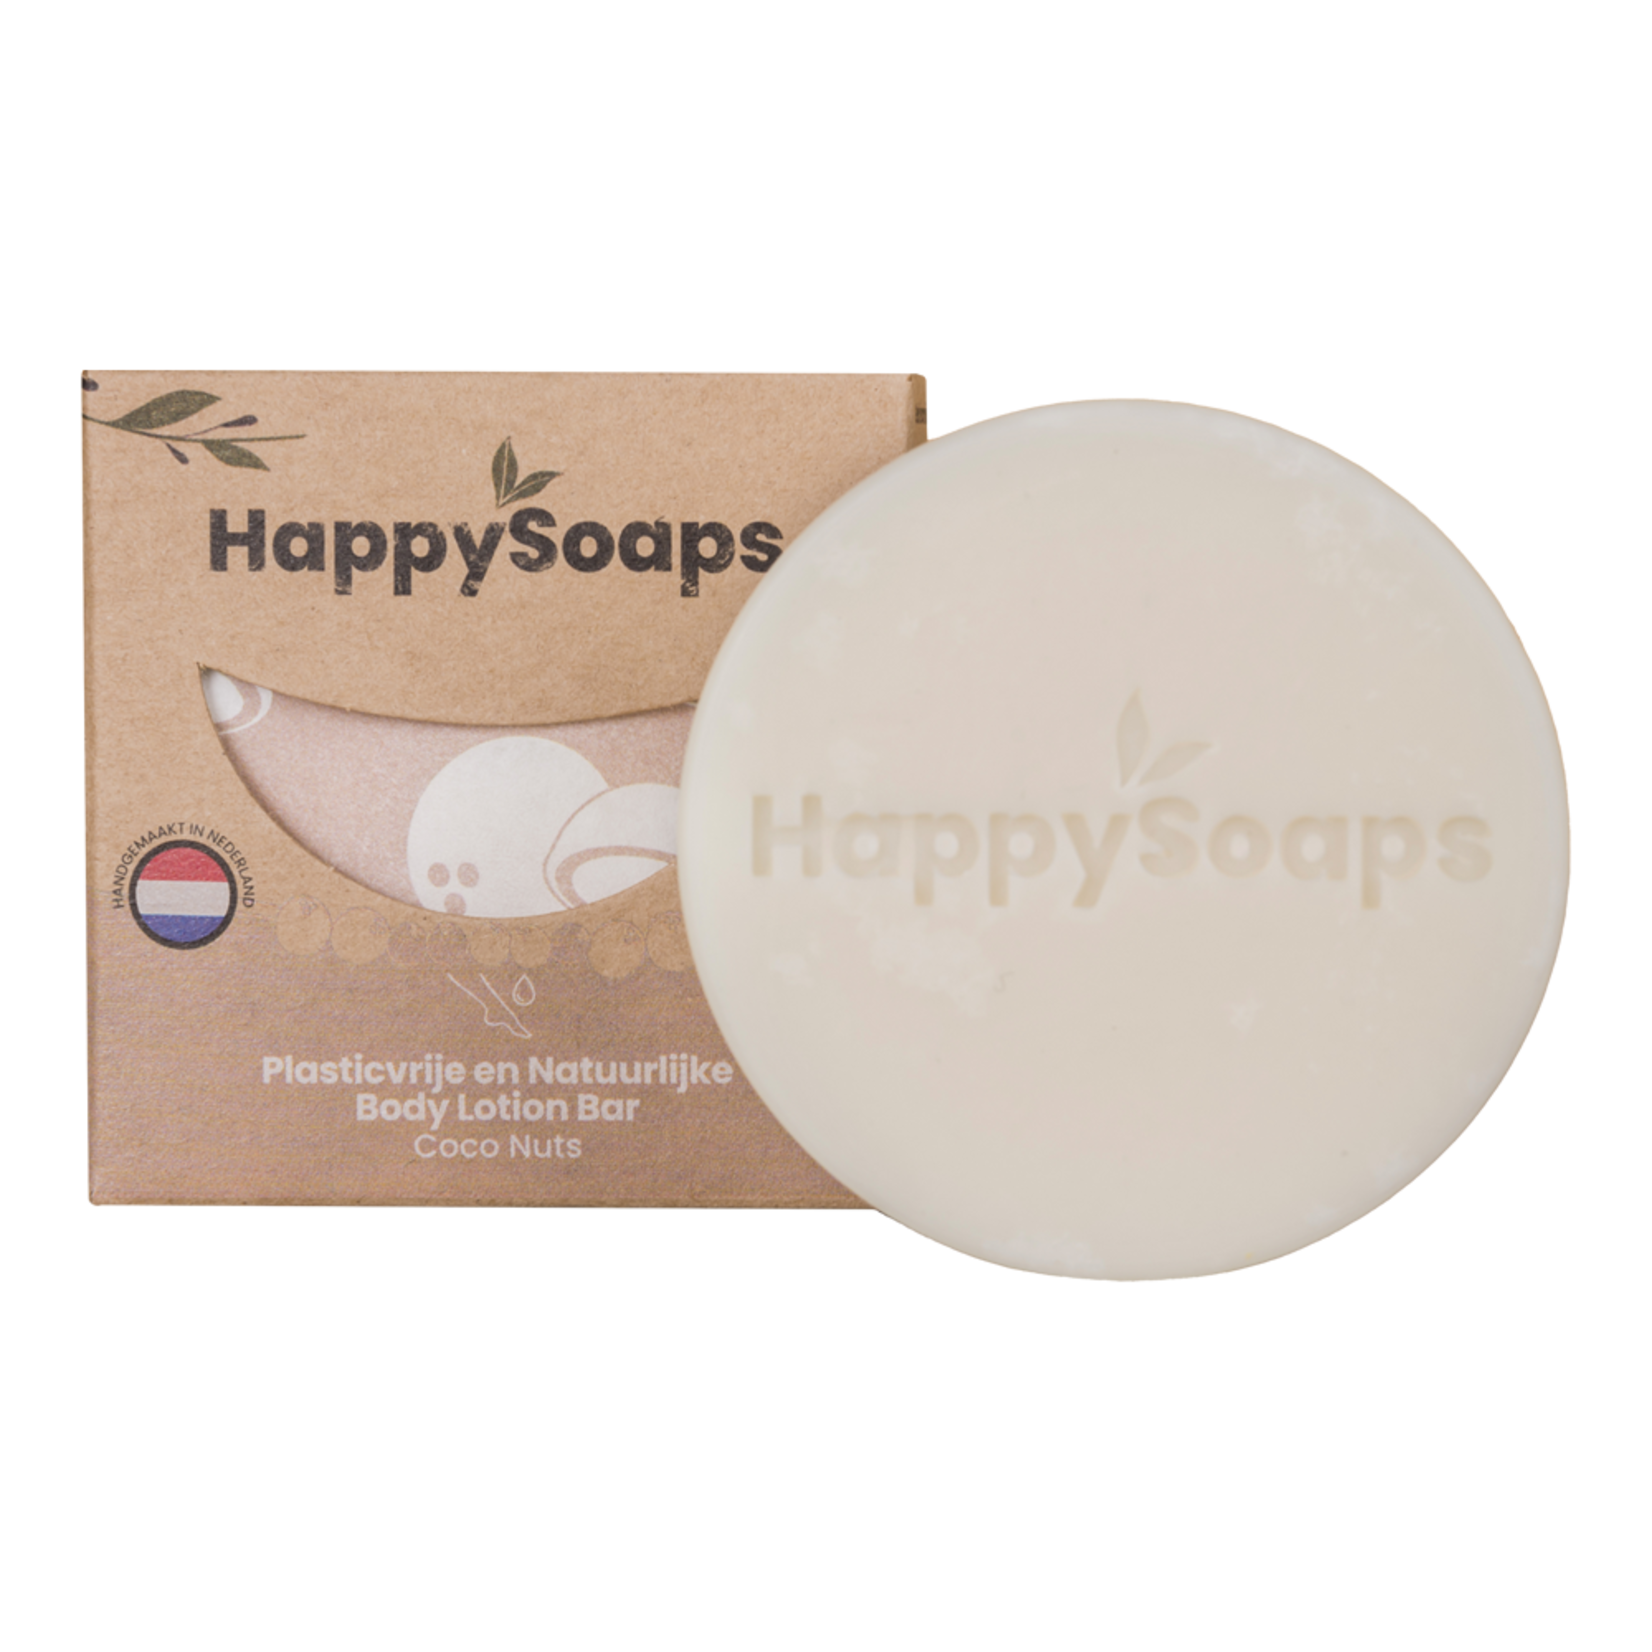 The Happy Soaps Happy Soaps Lotion bar